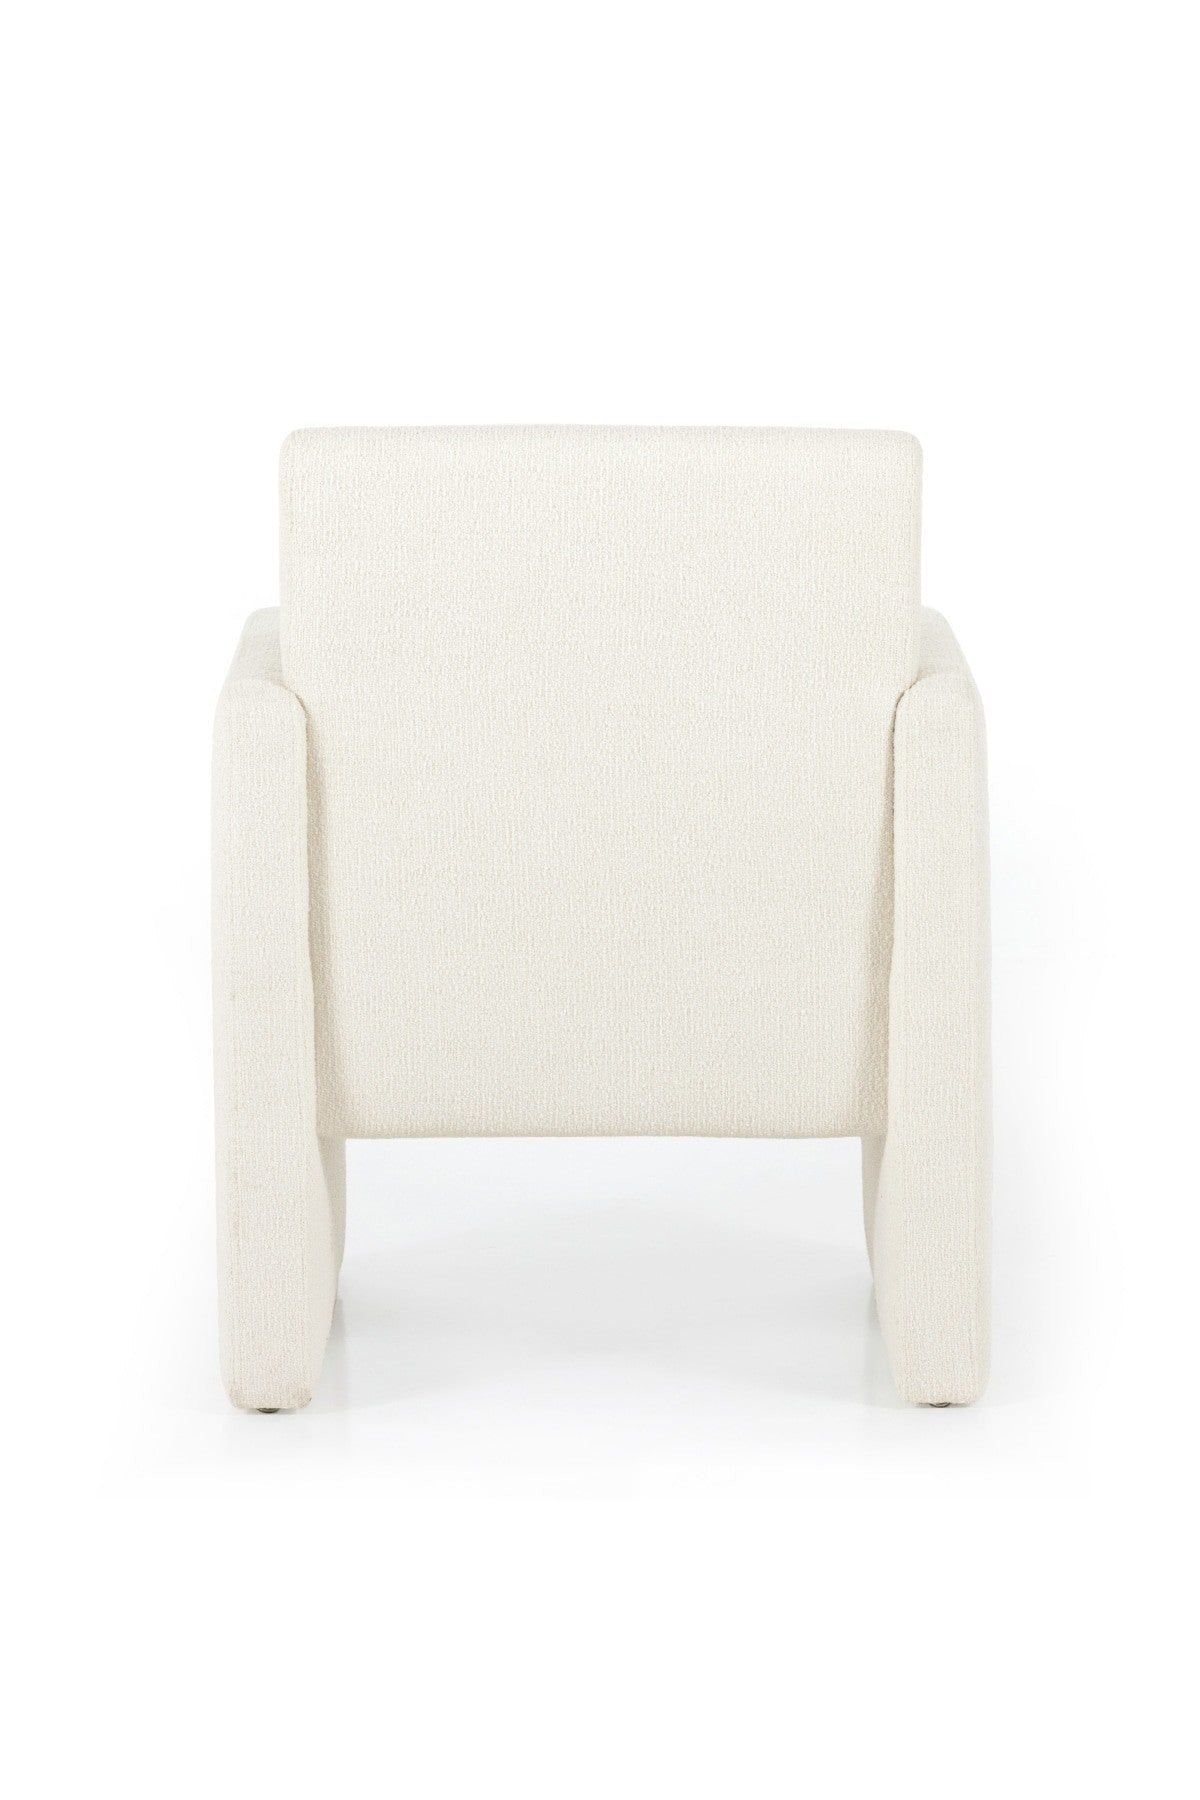 Manzo Dining Chair